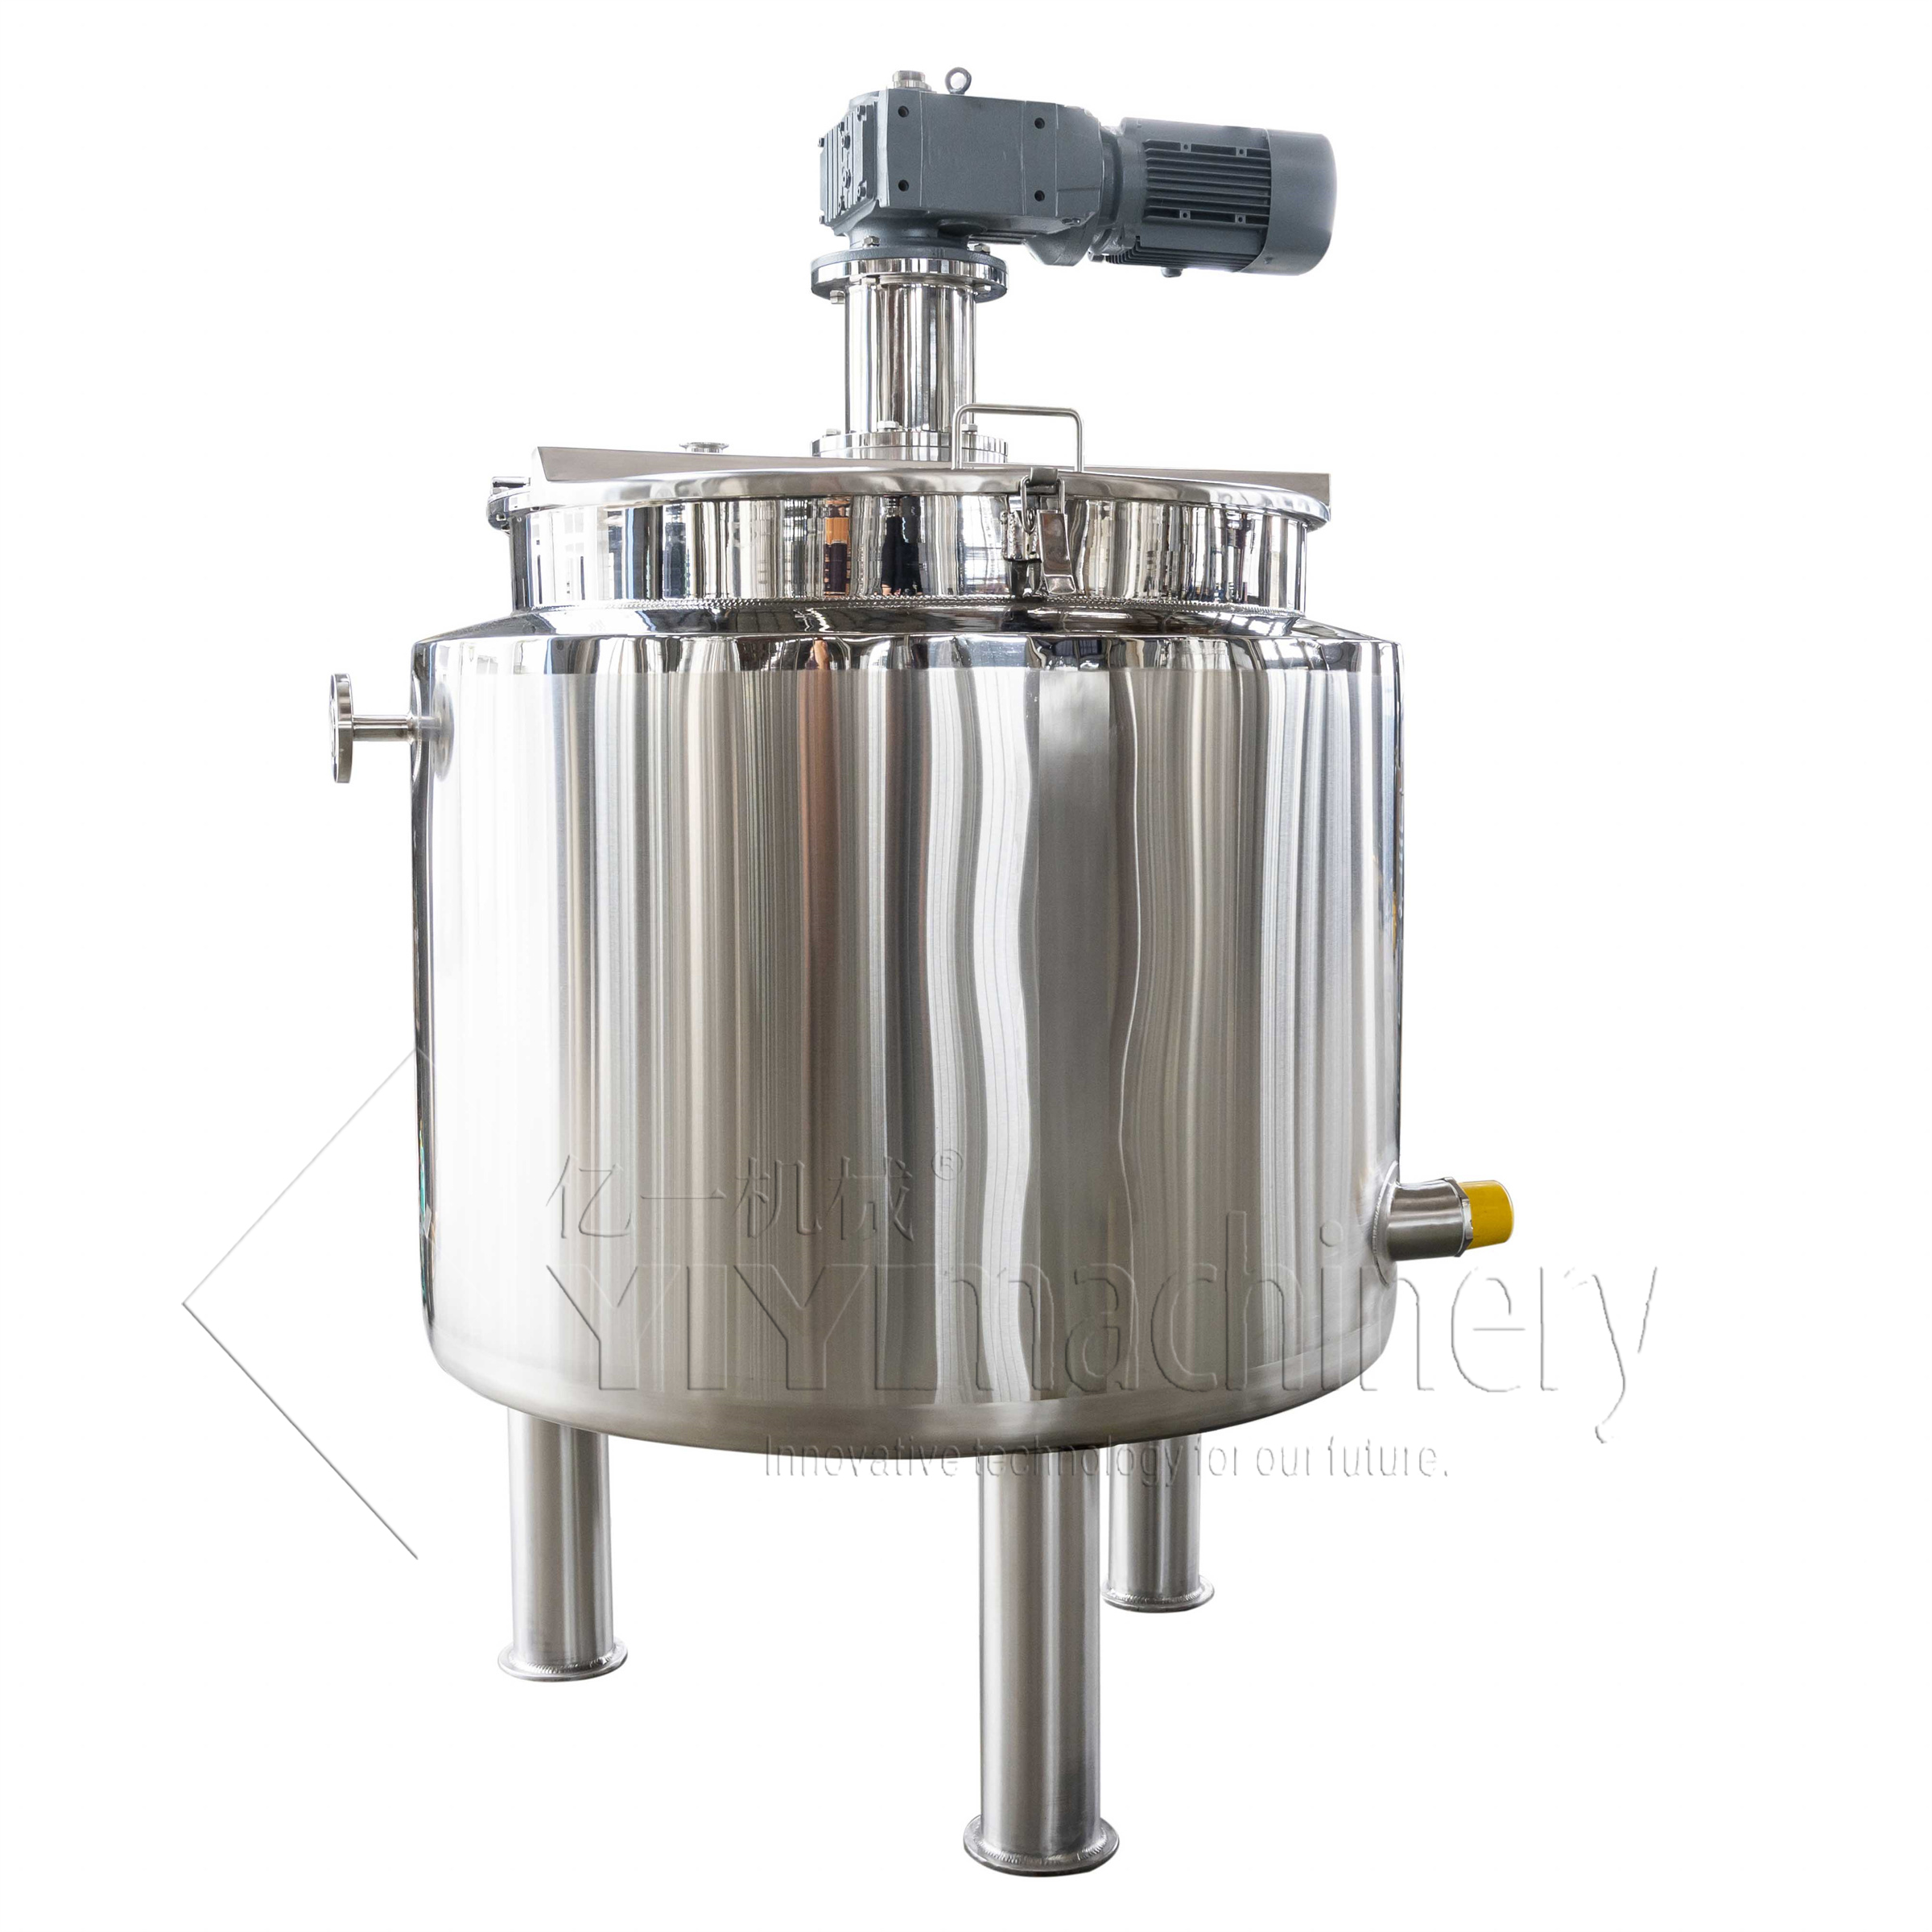 Factory Tank Sus 304 316 L Mixing Equipment With Stairs Platform Stainless Steel Mixing Vessels 